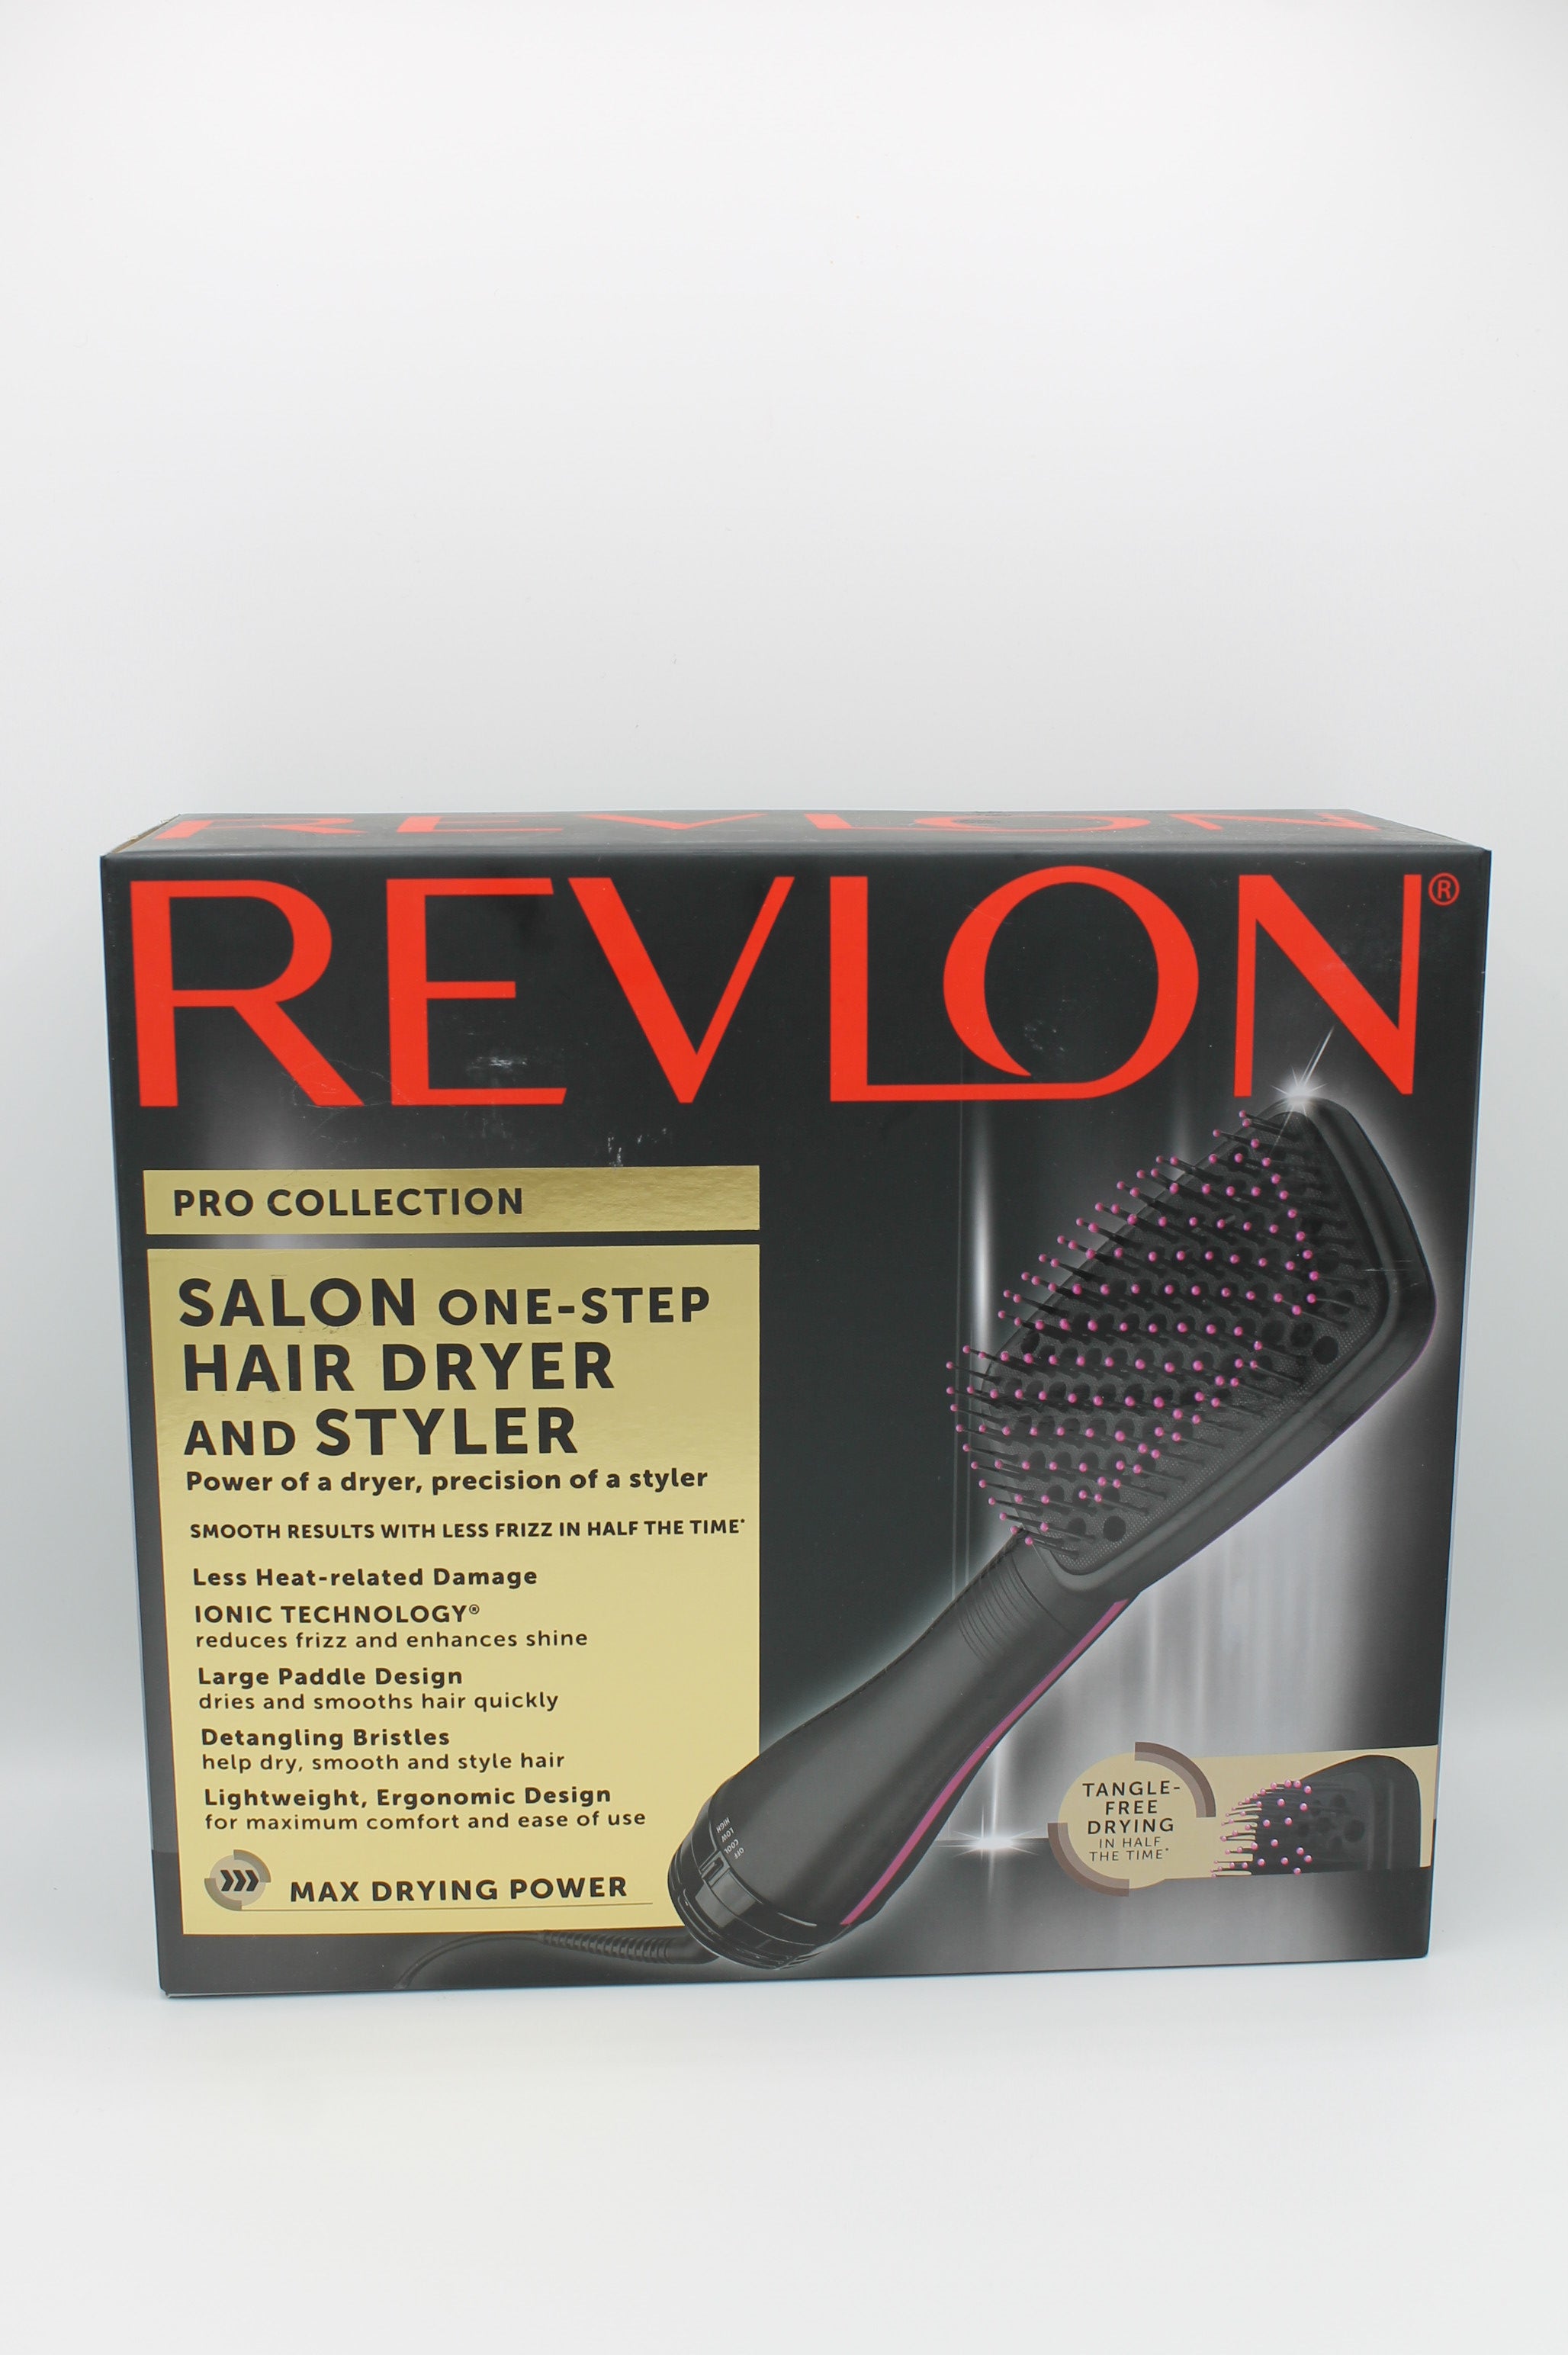 Salon One-step Hair Dryer and Styler